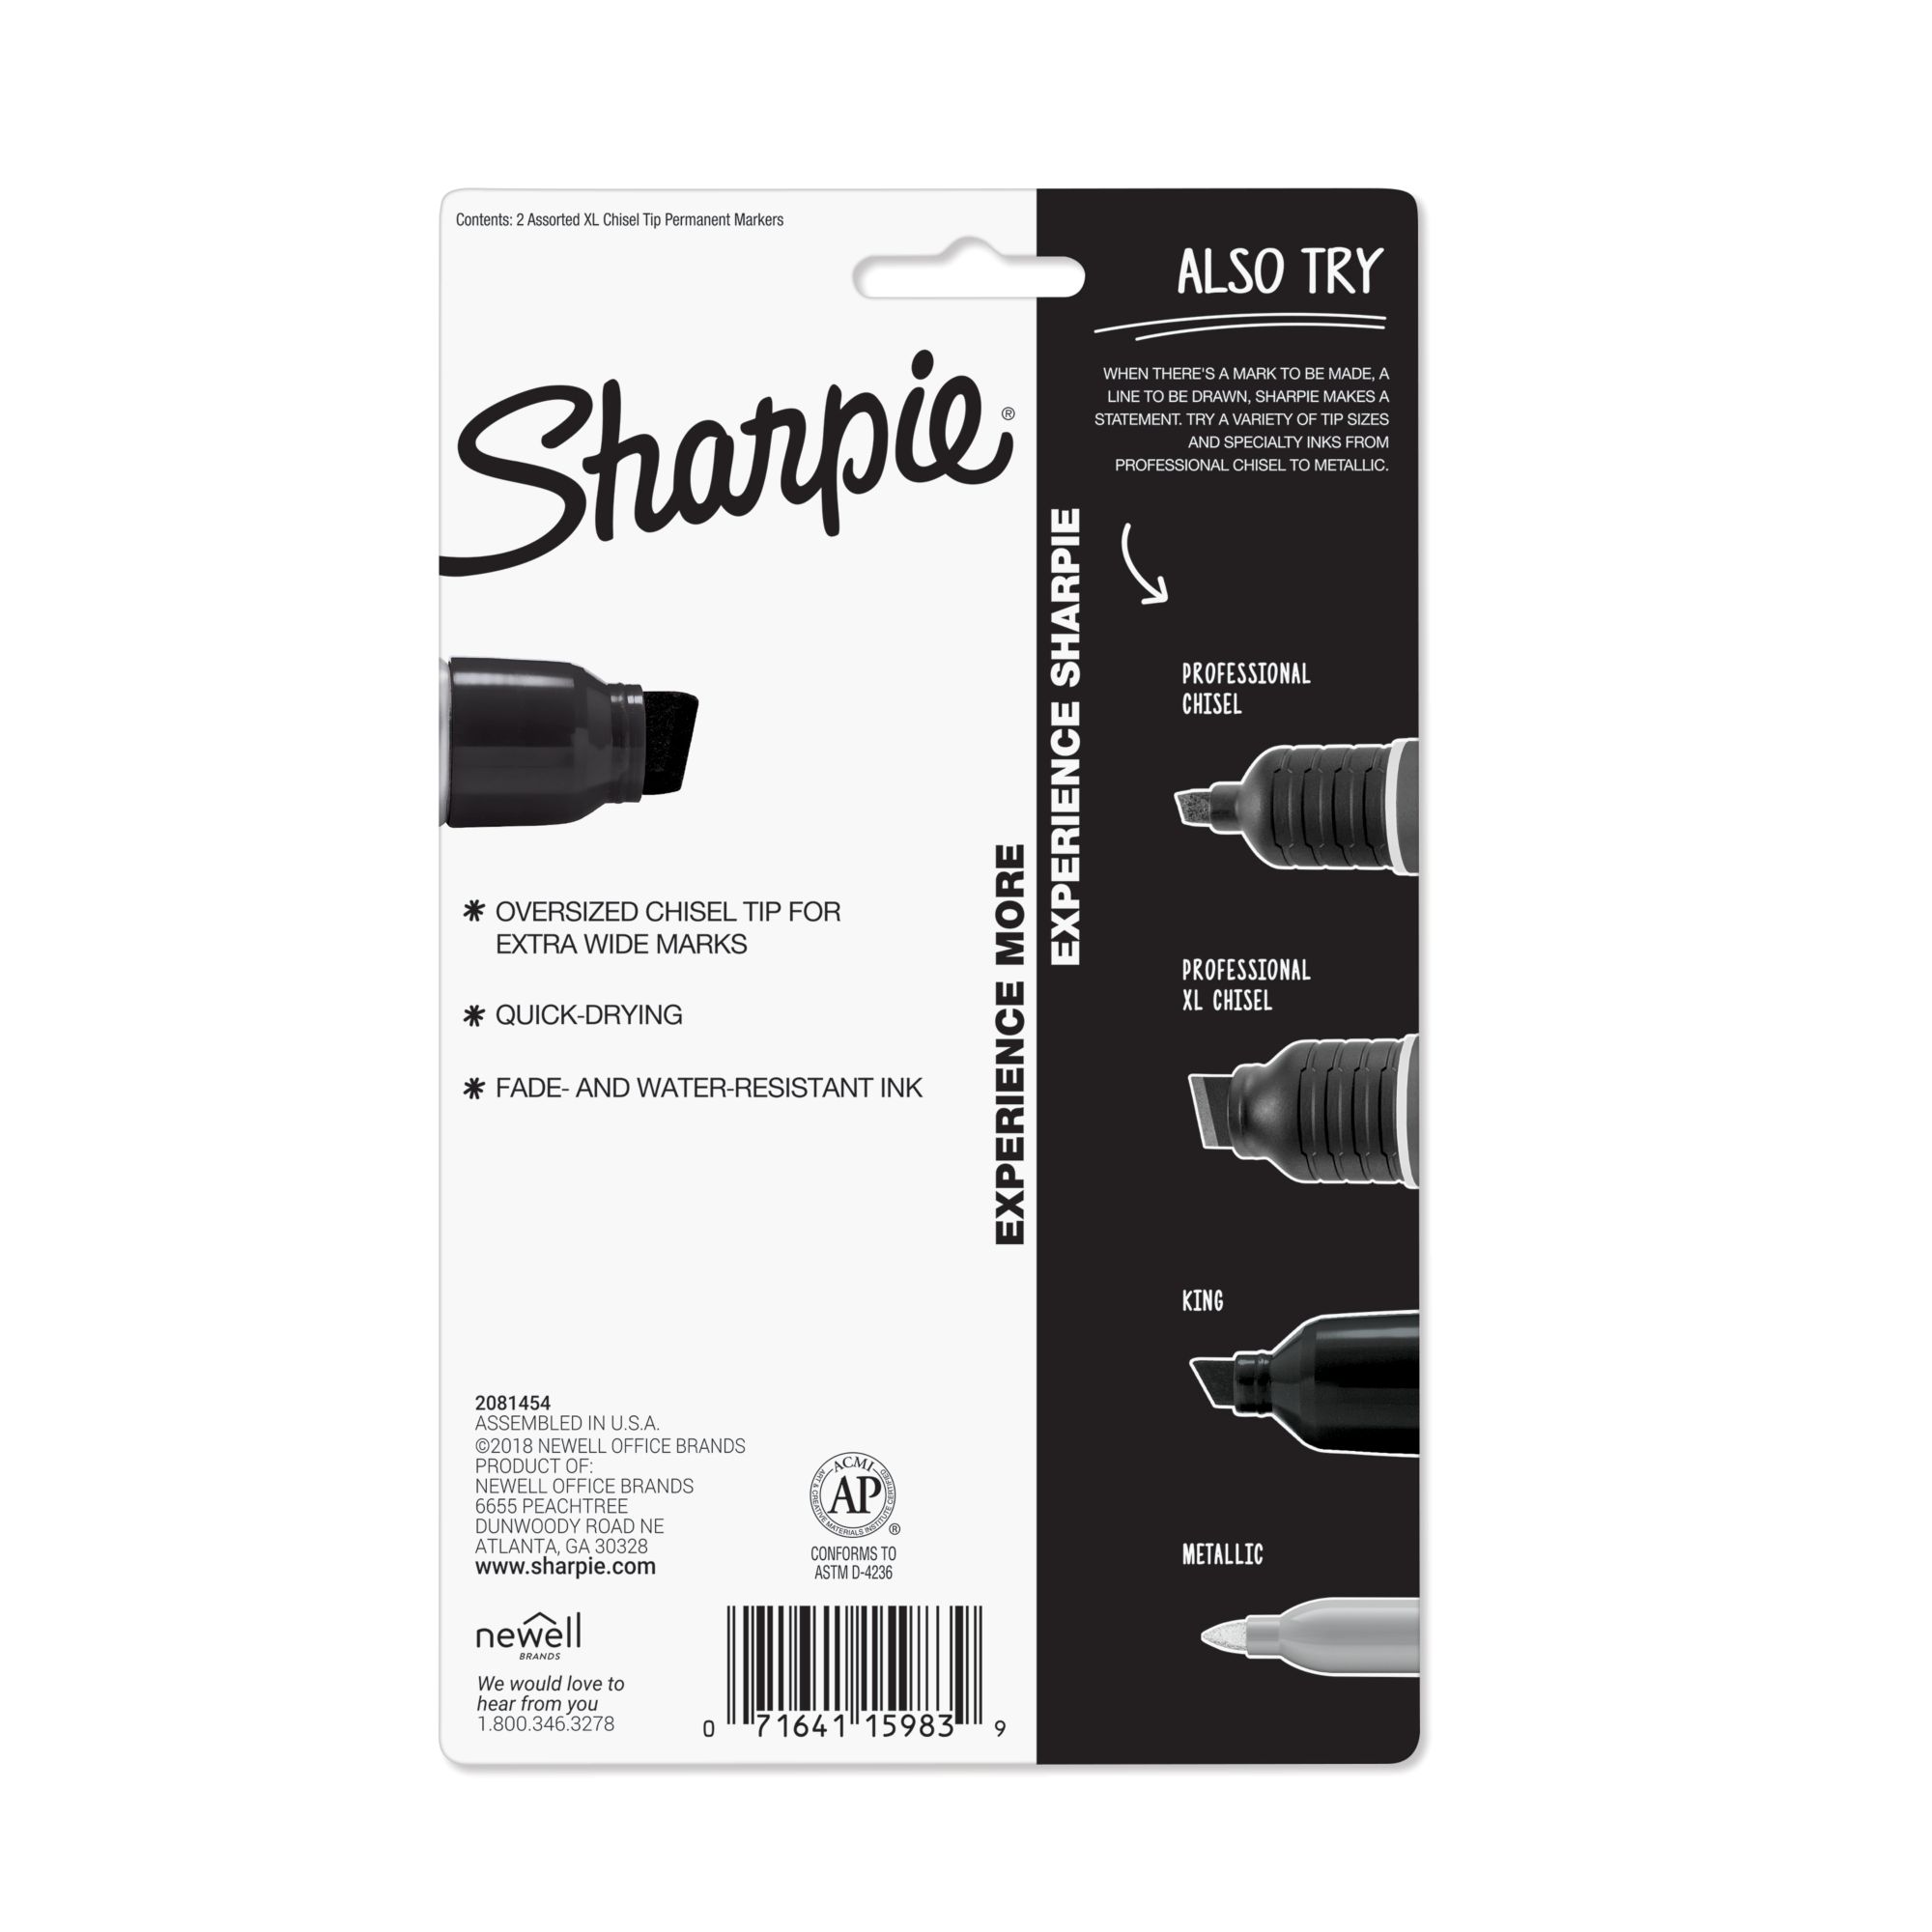 SHARPIE® PERMANENT MARKER, MAGNUM, CHISEL POINT STYLE - Multi access office